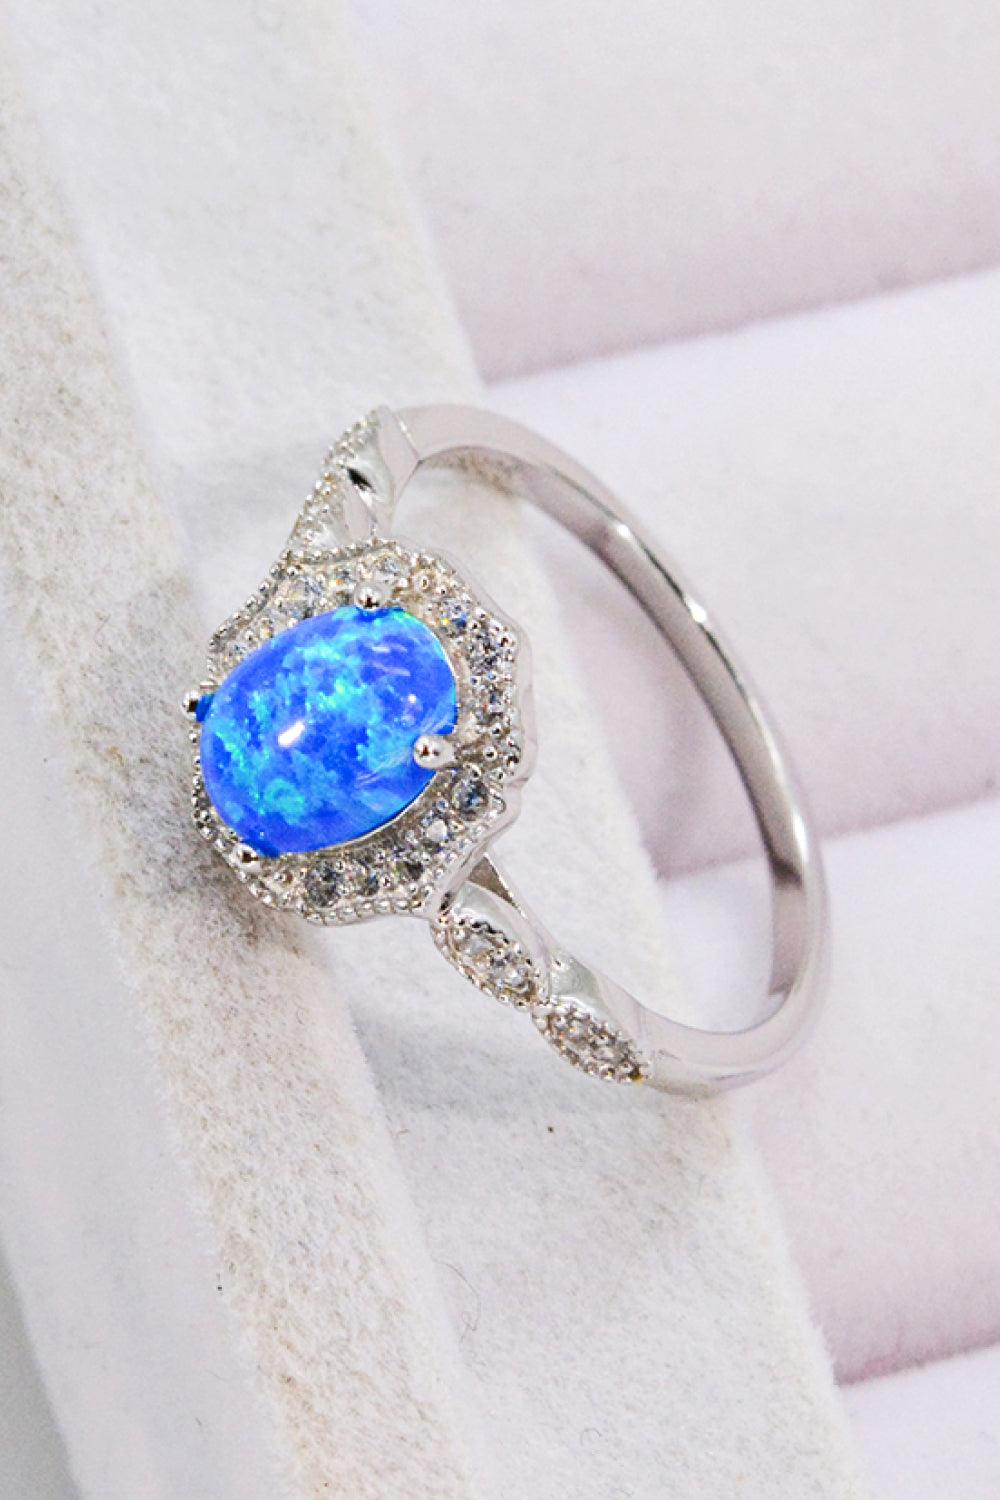 Blue Opal and Zircon 925 Sterling Silver Ring - Crazy Like a Daisy Boutique #